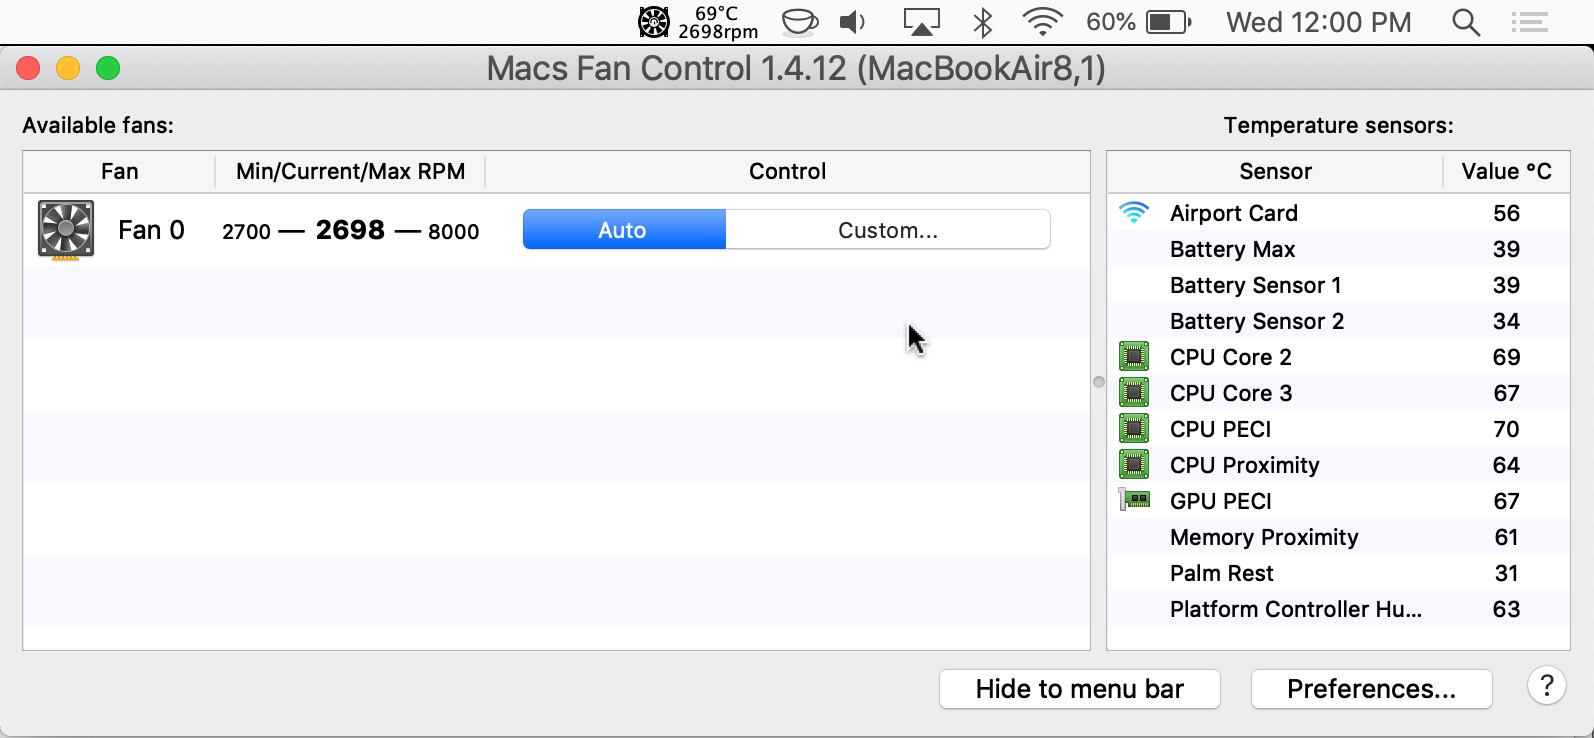 nuance Perth noget How to Adjust Mac Fan Speed Manually with Macs Fan Control | OSXDaily